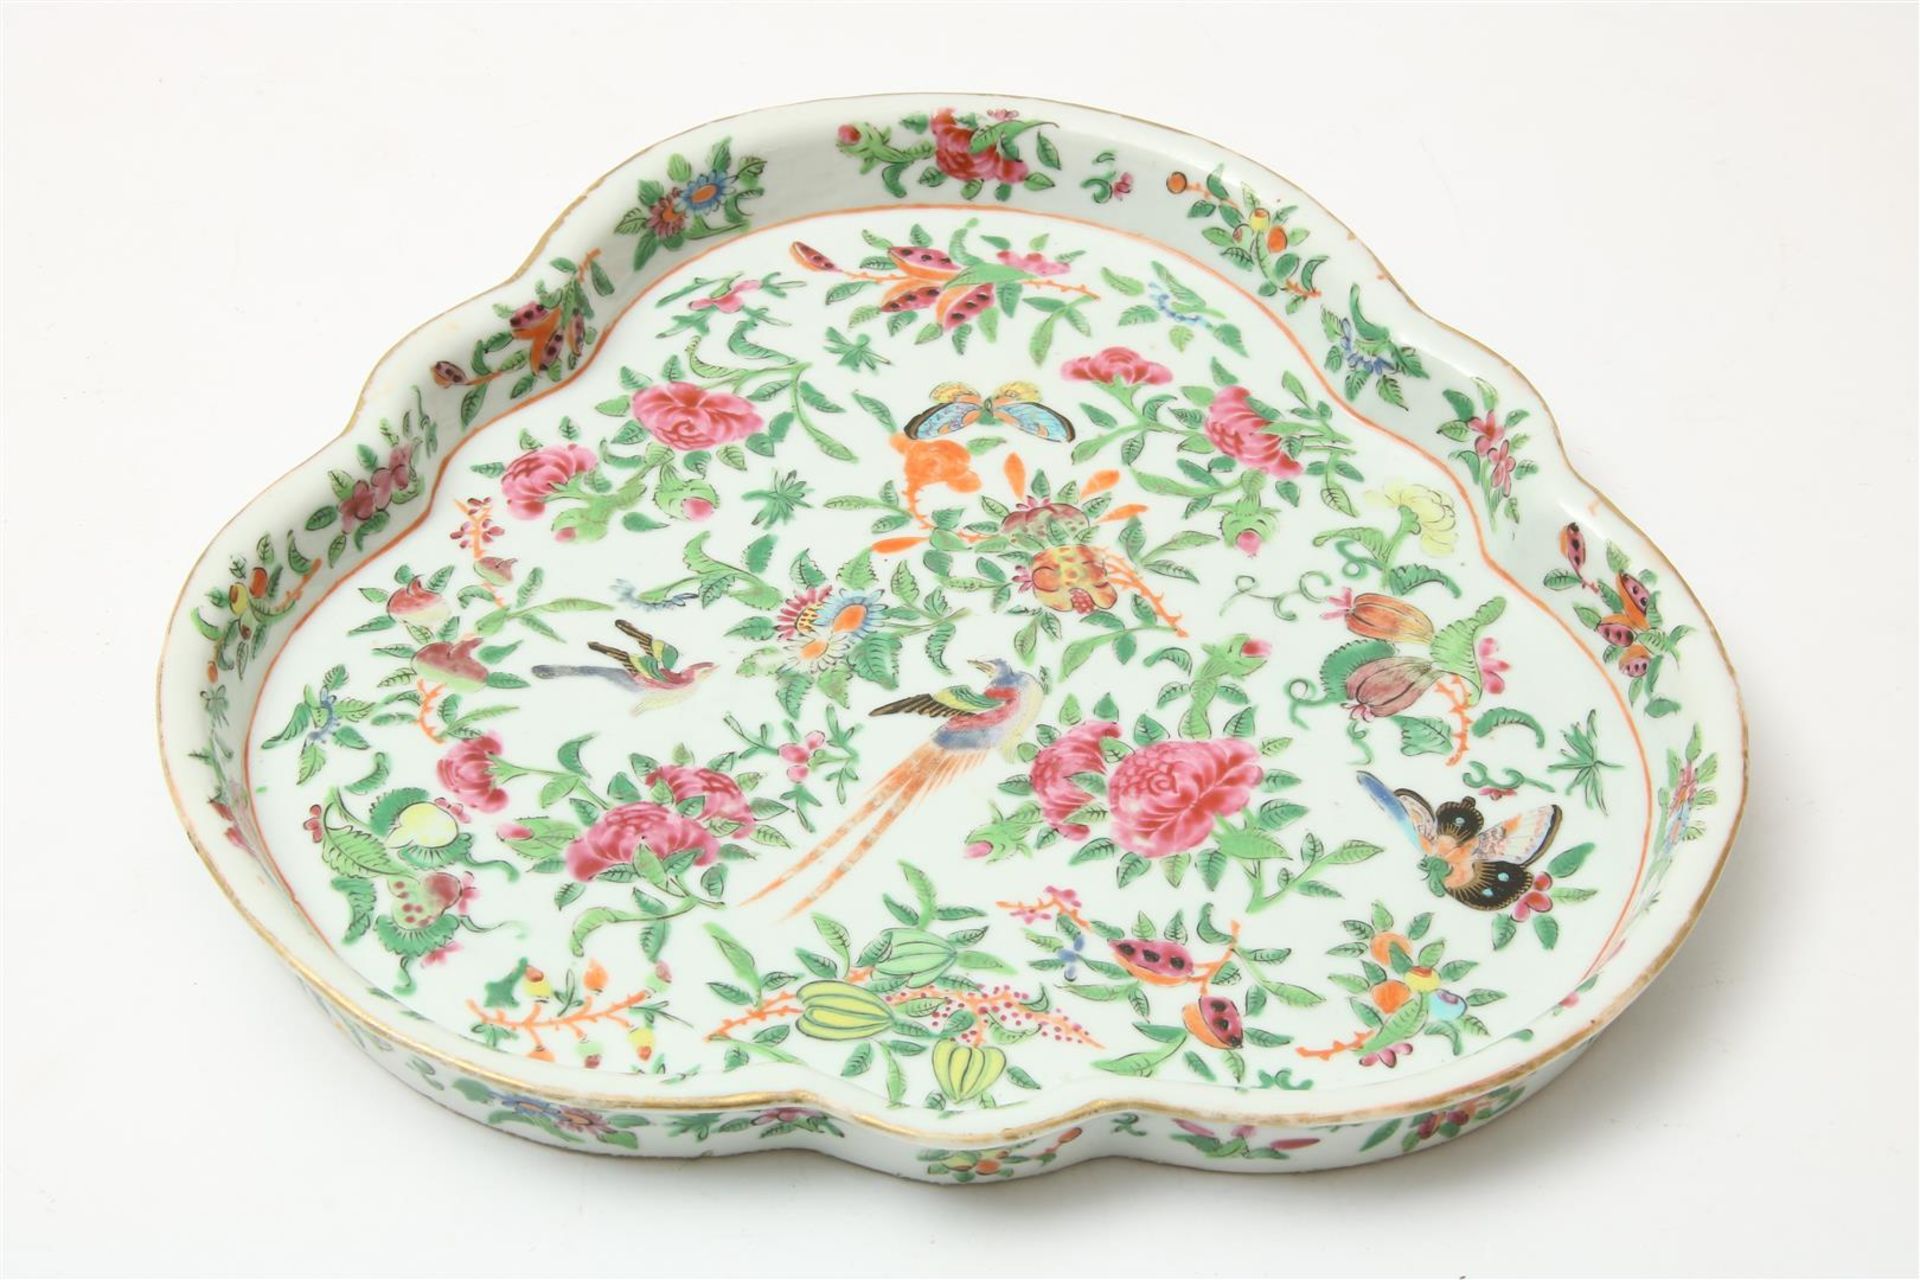 Polychrome porcelain tray, triangular with raised edge and depiction of birds, butterflies, - Image 2 of 4